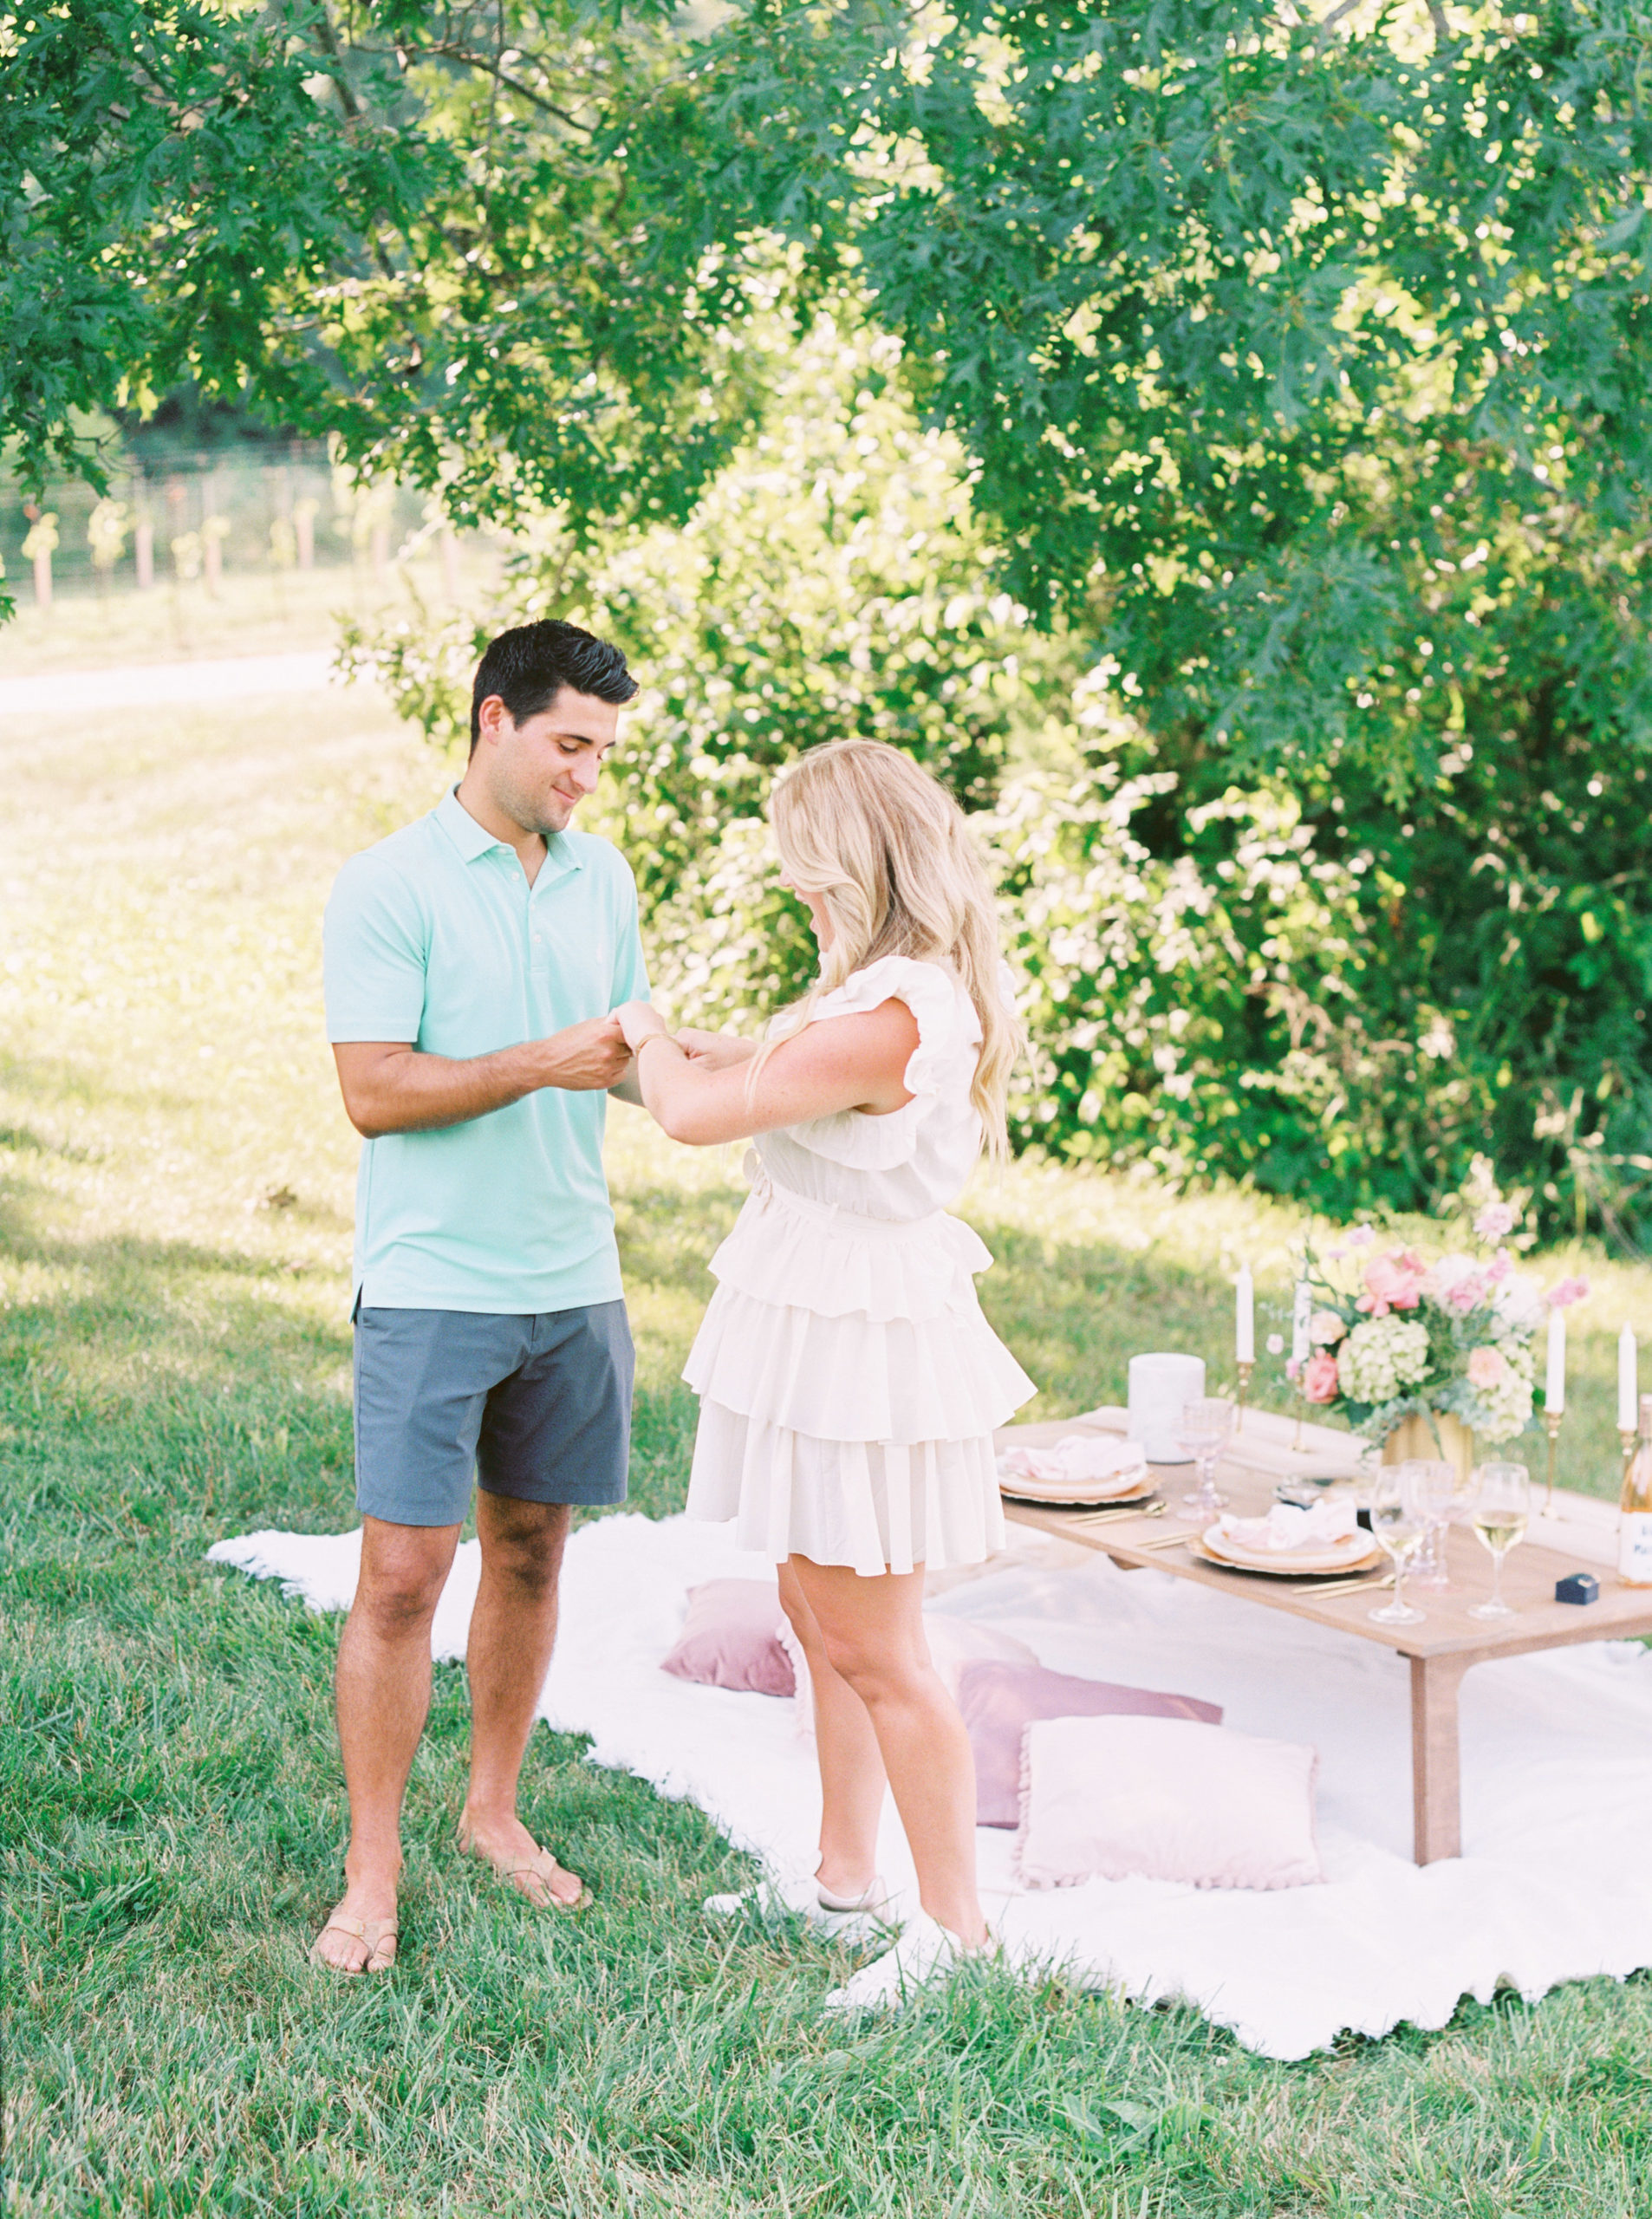 chandler hill winery surprise picnic proposal